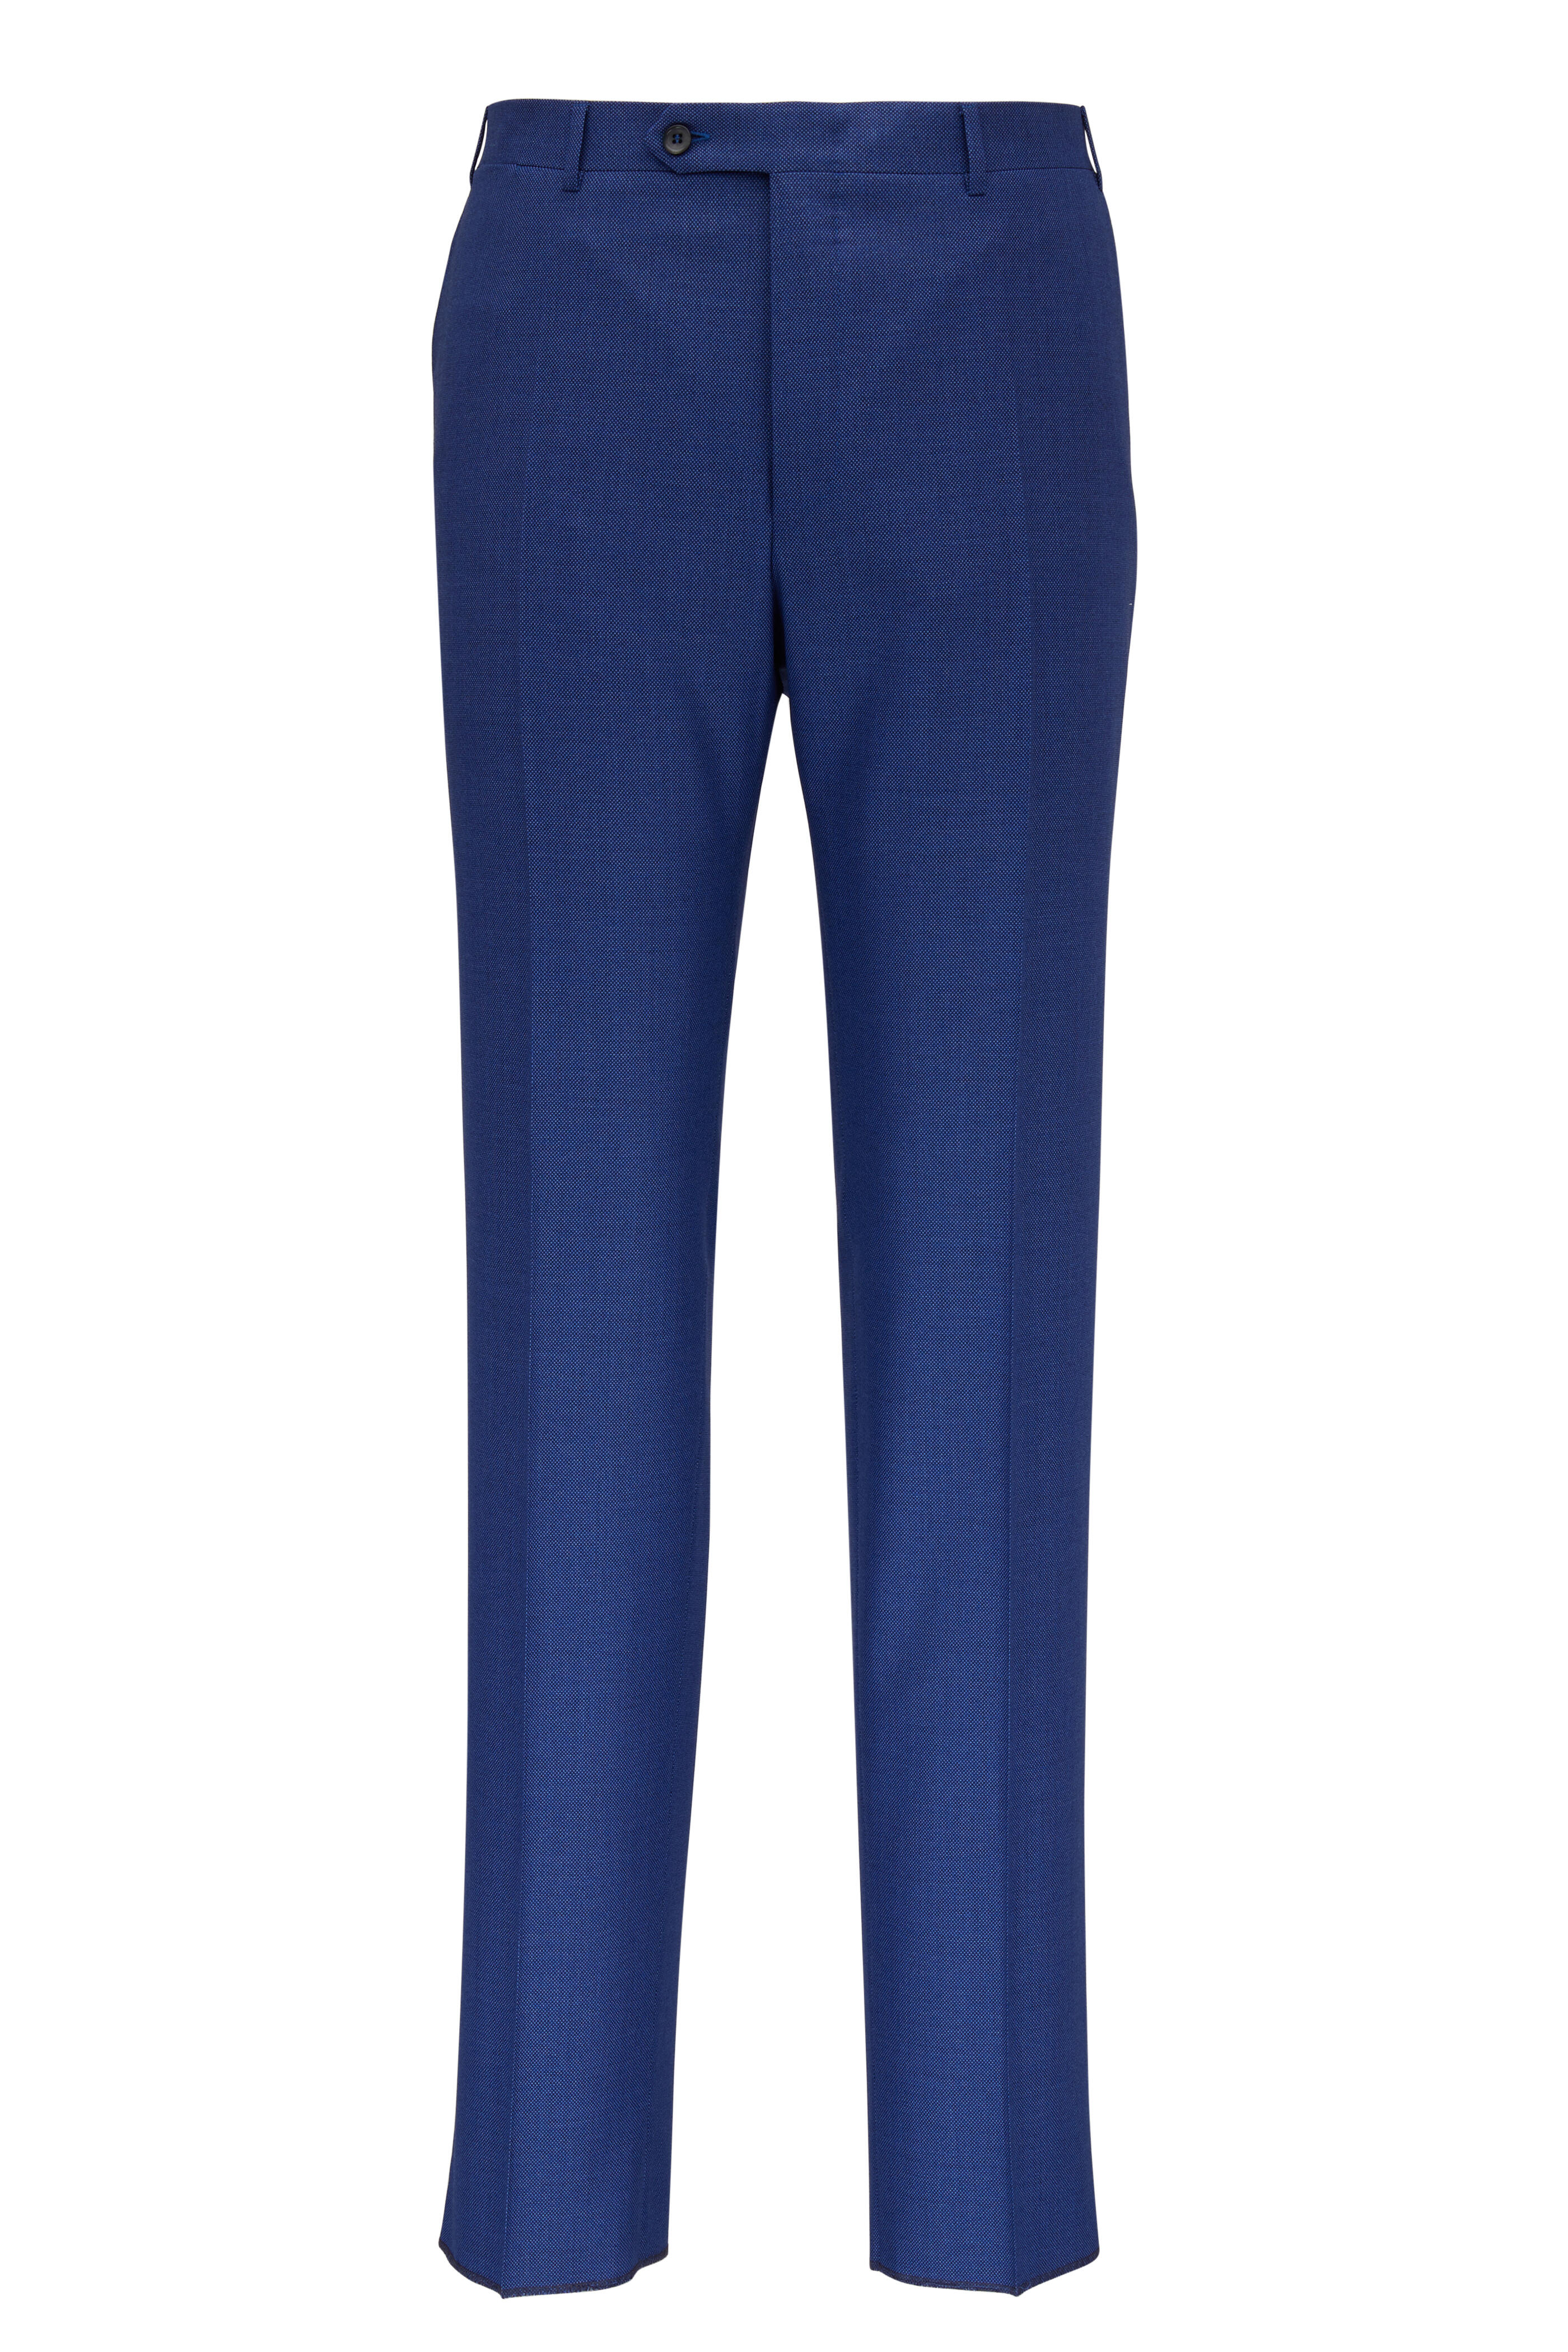 Canali - Royal Blue Birdseye Wool Suit | Mitchell Stores